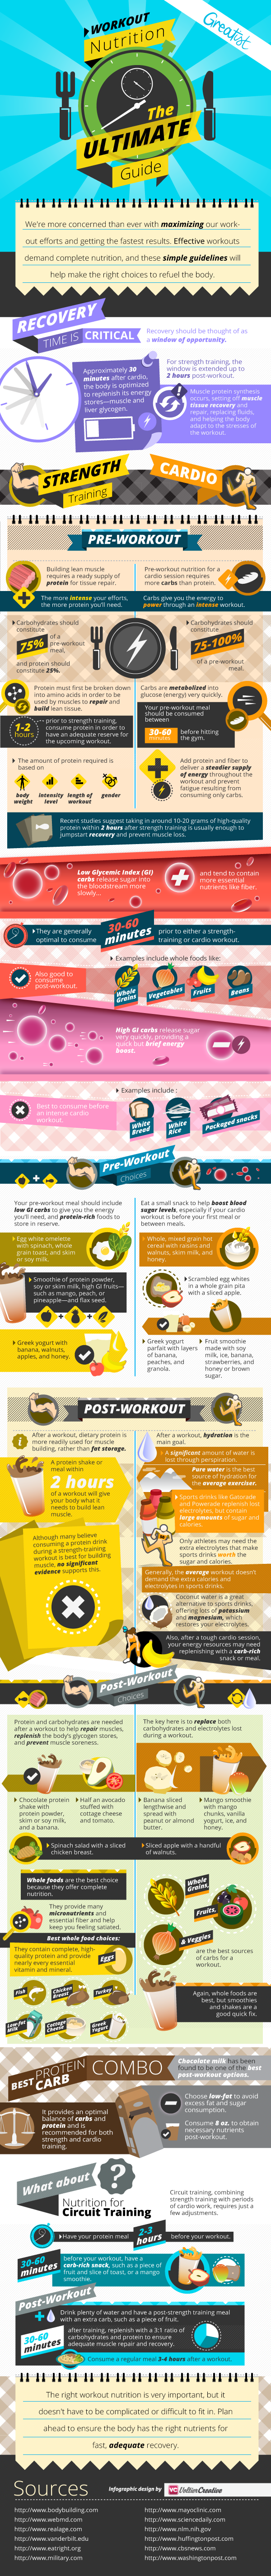 Workout Nutrition - The Ultimate Guide [infographic]